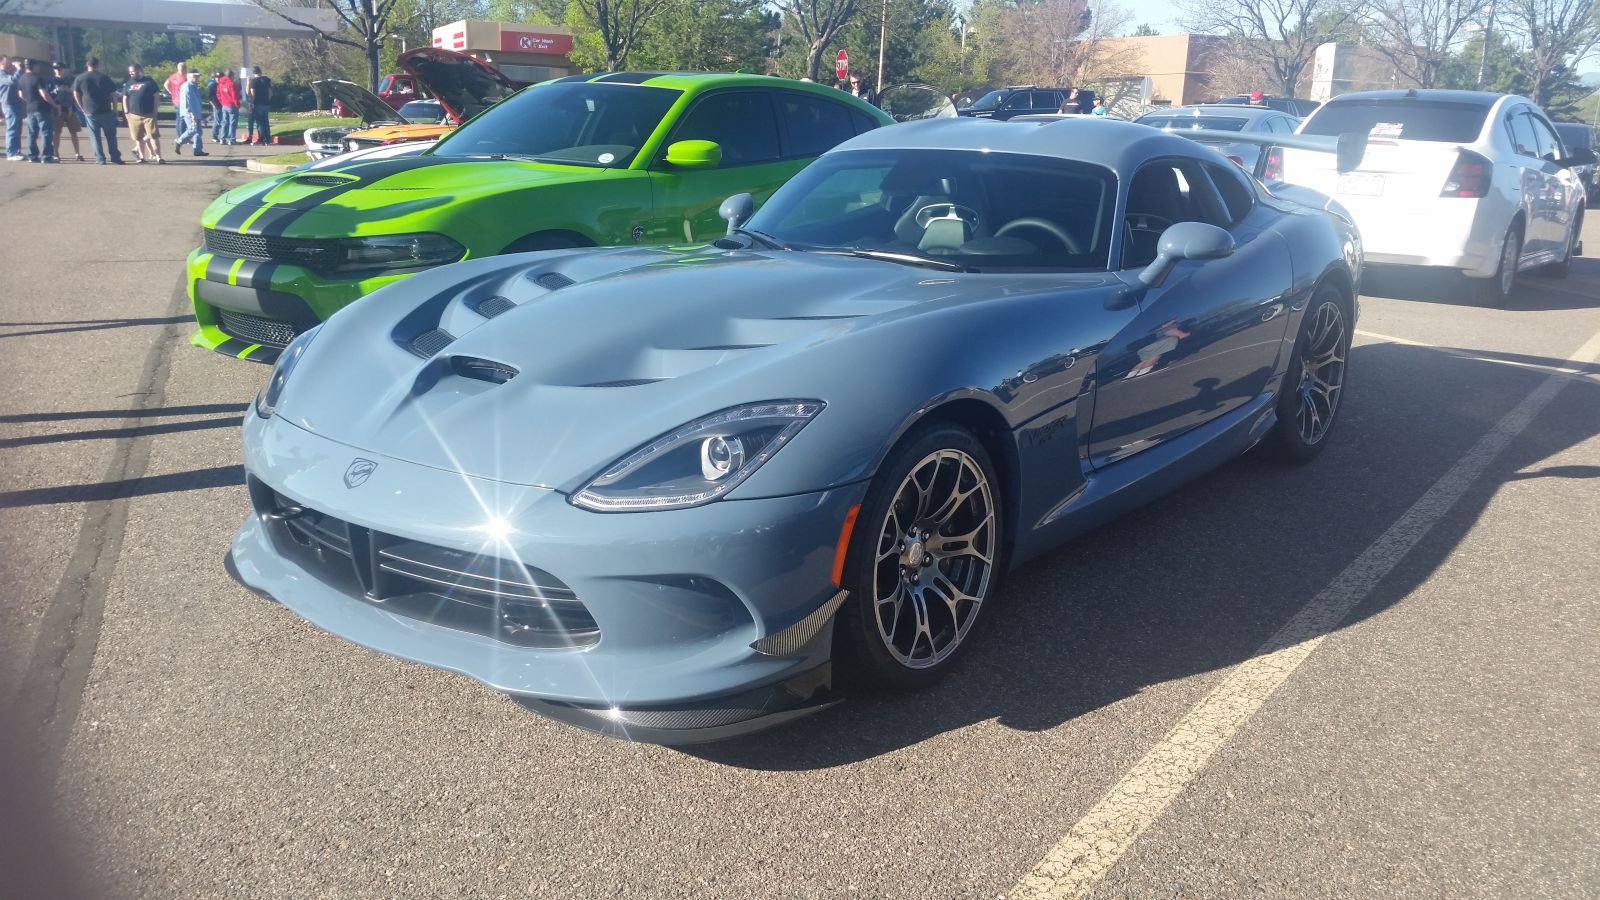 I like Vipers... can we stop making everything this shitty gray color please?!?!